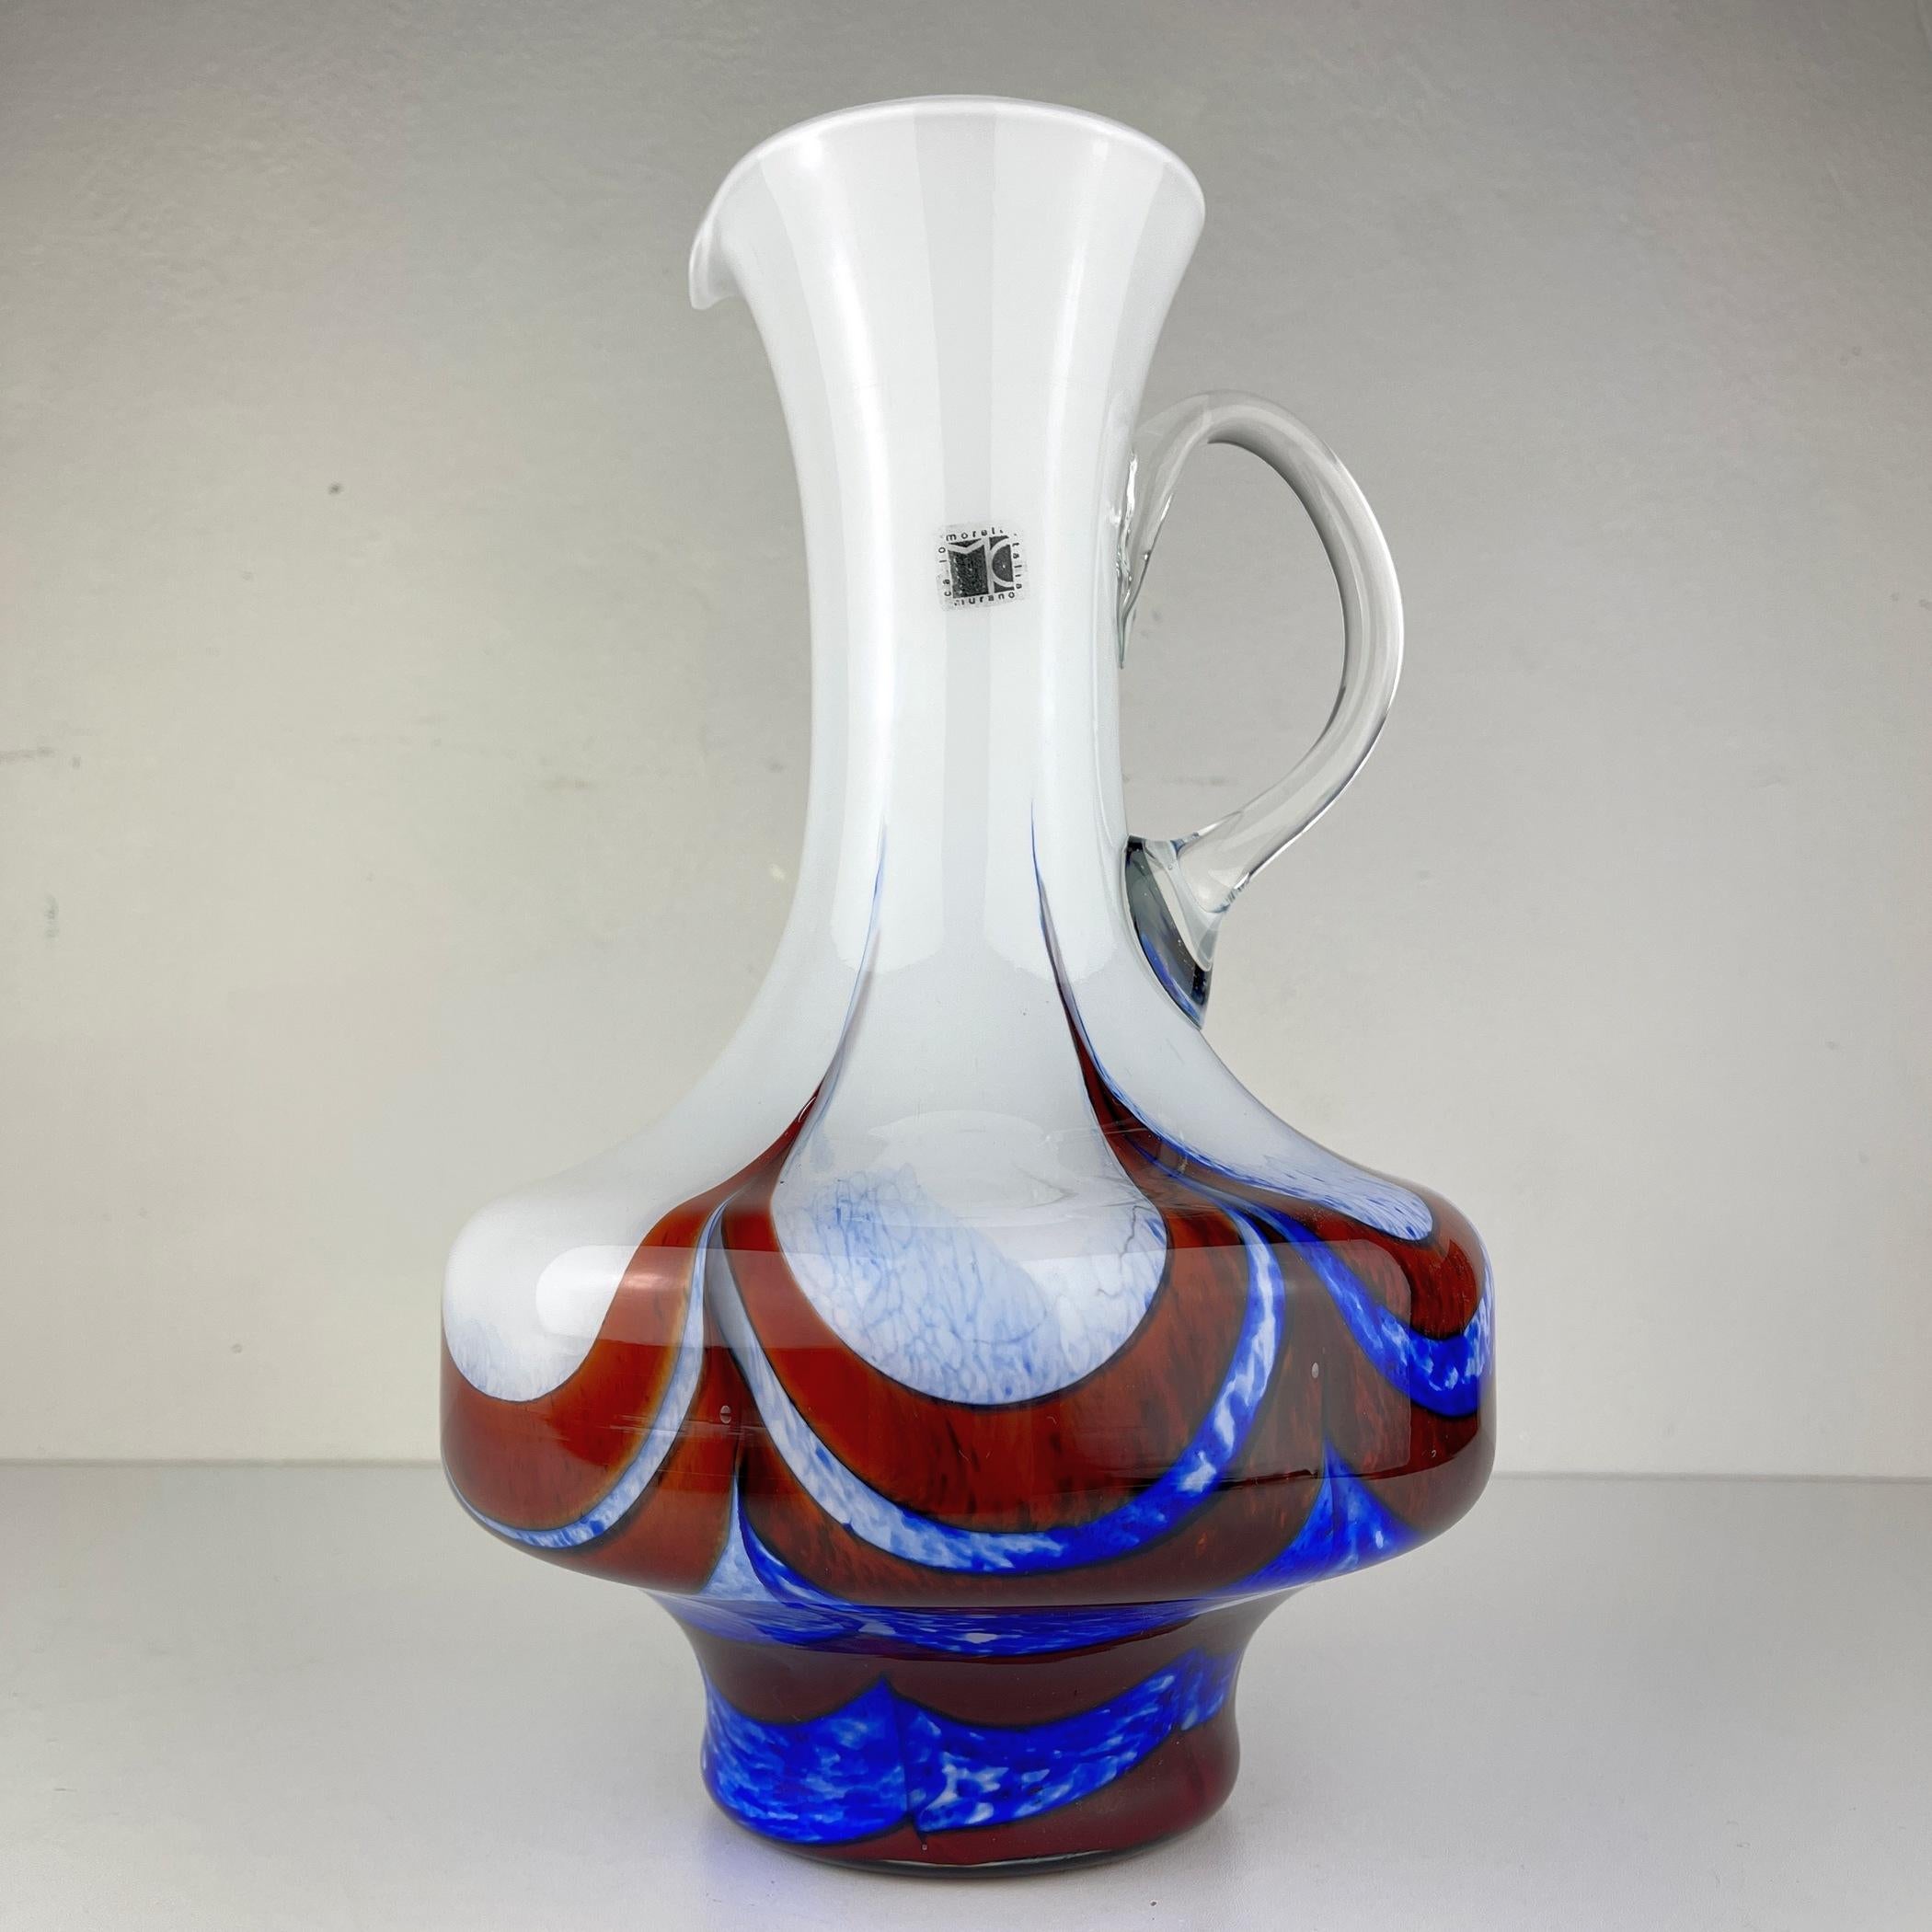 Beautiful murano glass pitcher by Carlo Moretti made in Italy in the 1970s. Carlo Moretti is a “factory of originals” founded in 1958 by Carlo and Giovanni Moretti, combining innovation and continuous research. Unusual original products are